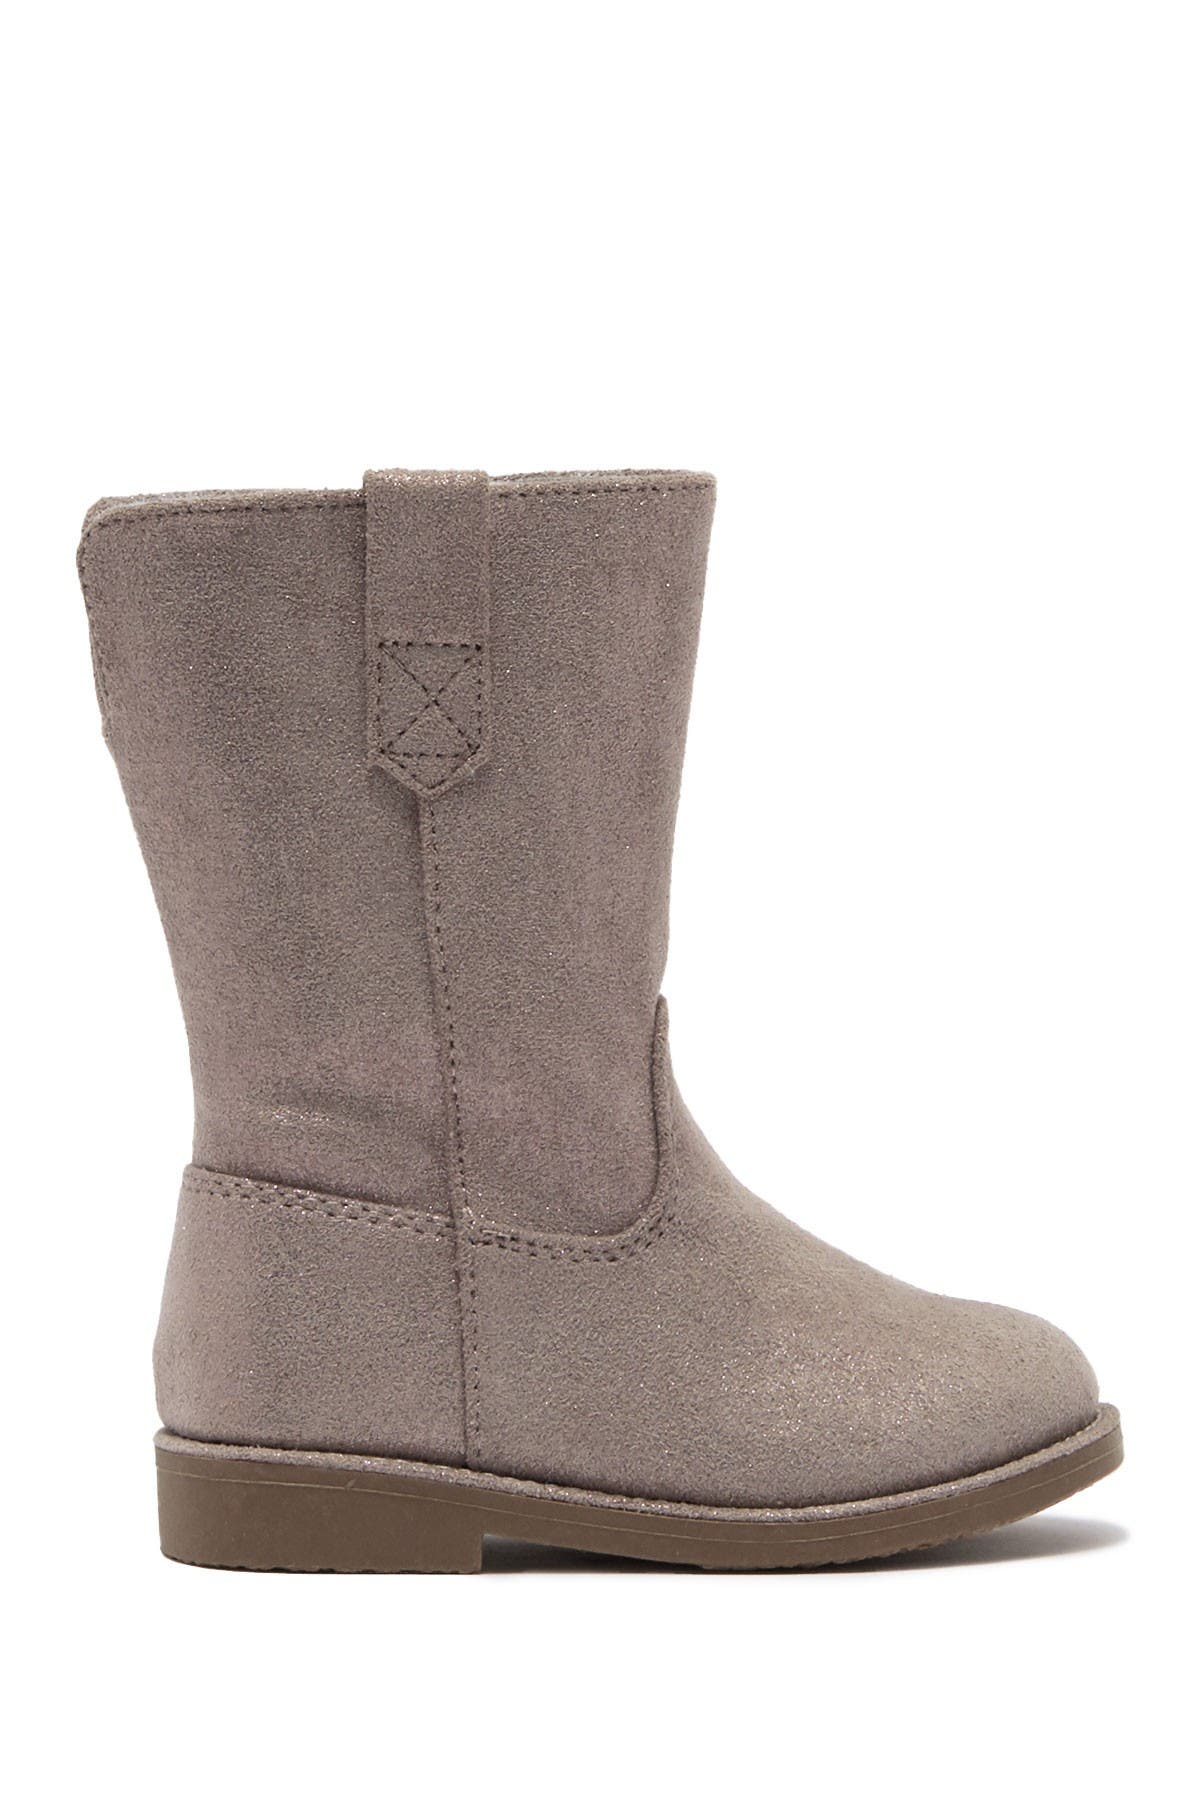 Harper Canyon | Lil Aster Tall Boot 